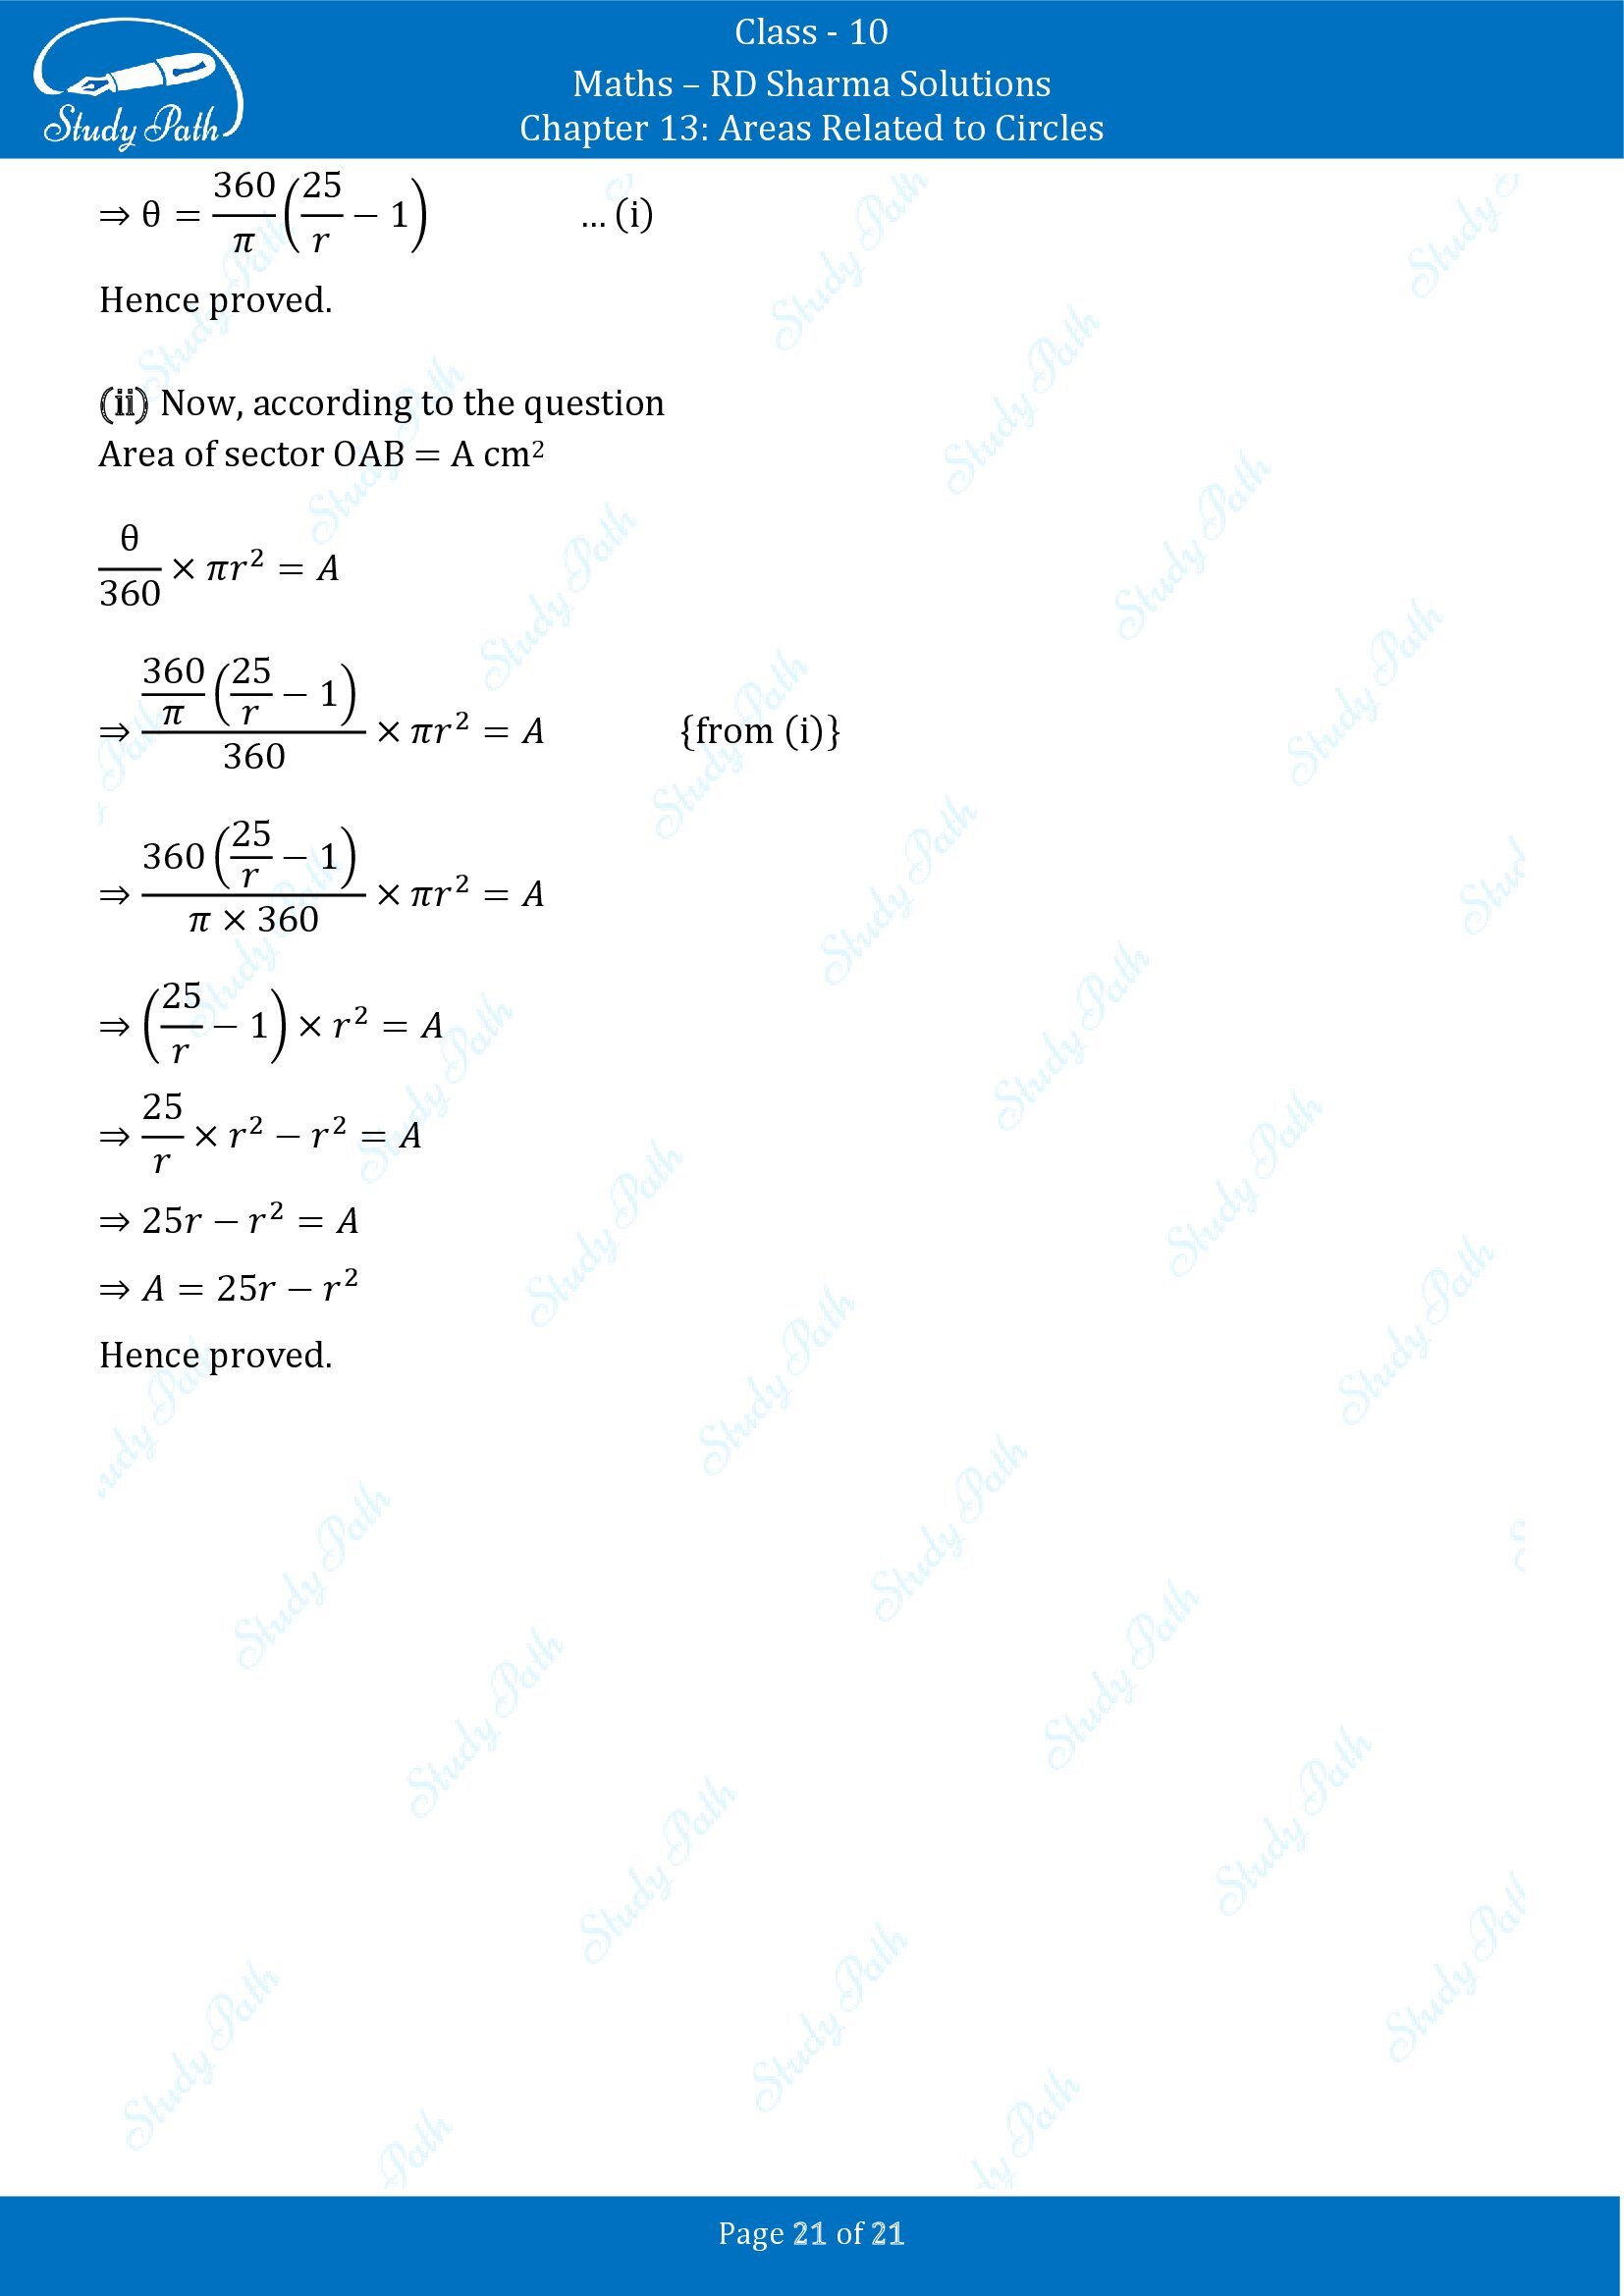 RD Sharma Solutions Class 10 Chapter 13 Areas Related to Circles Exercise 13.2 00021